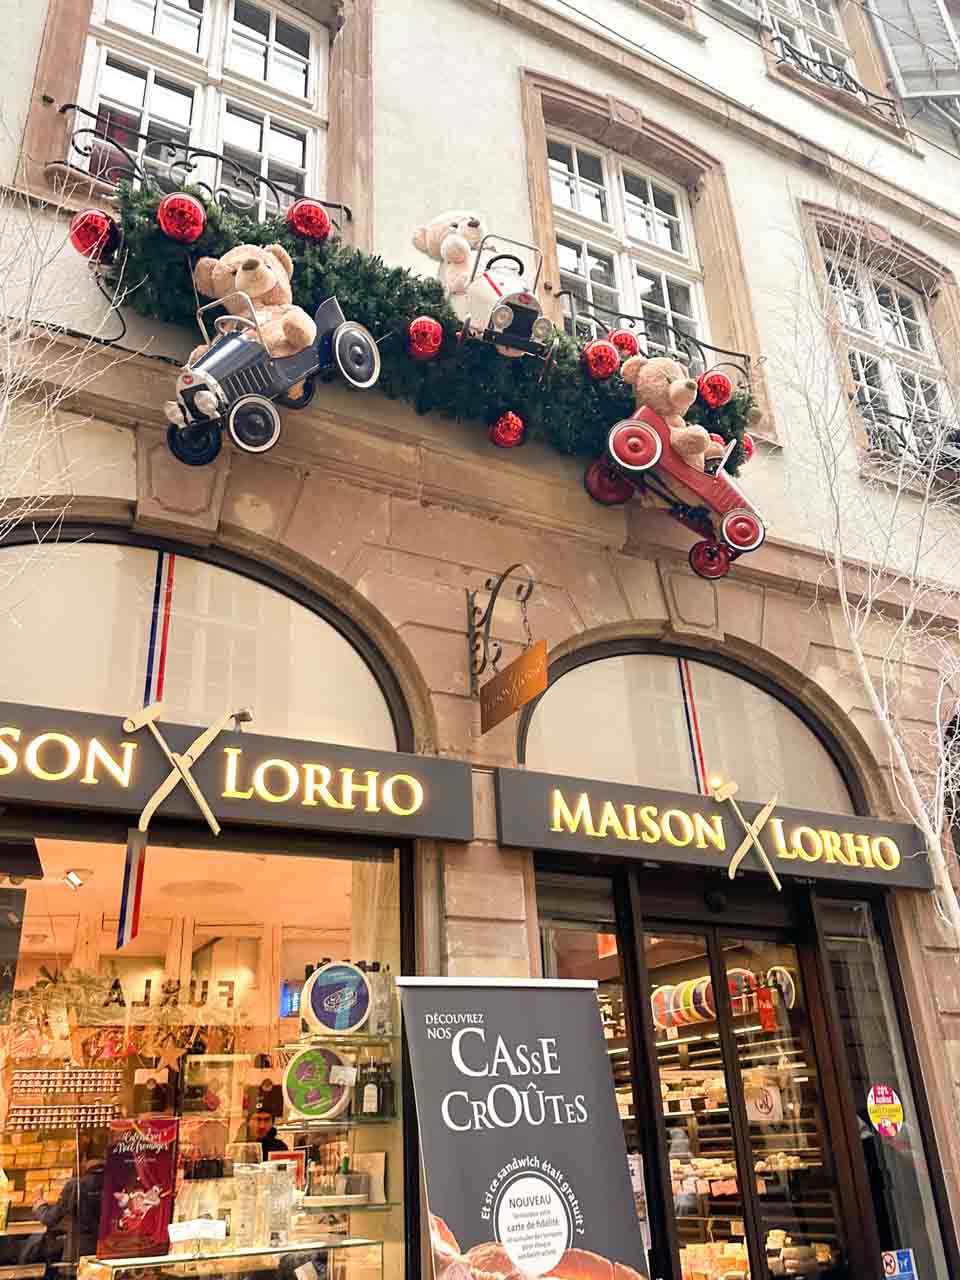 The façade of Maison Lorho in Strasbourg adorned with teddy bears and festive ornaments